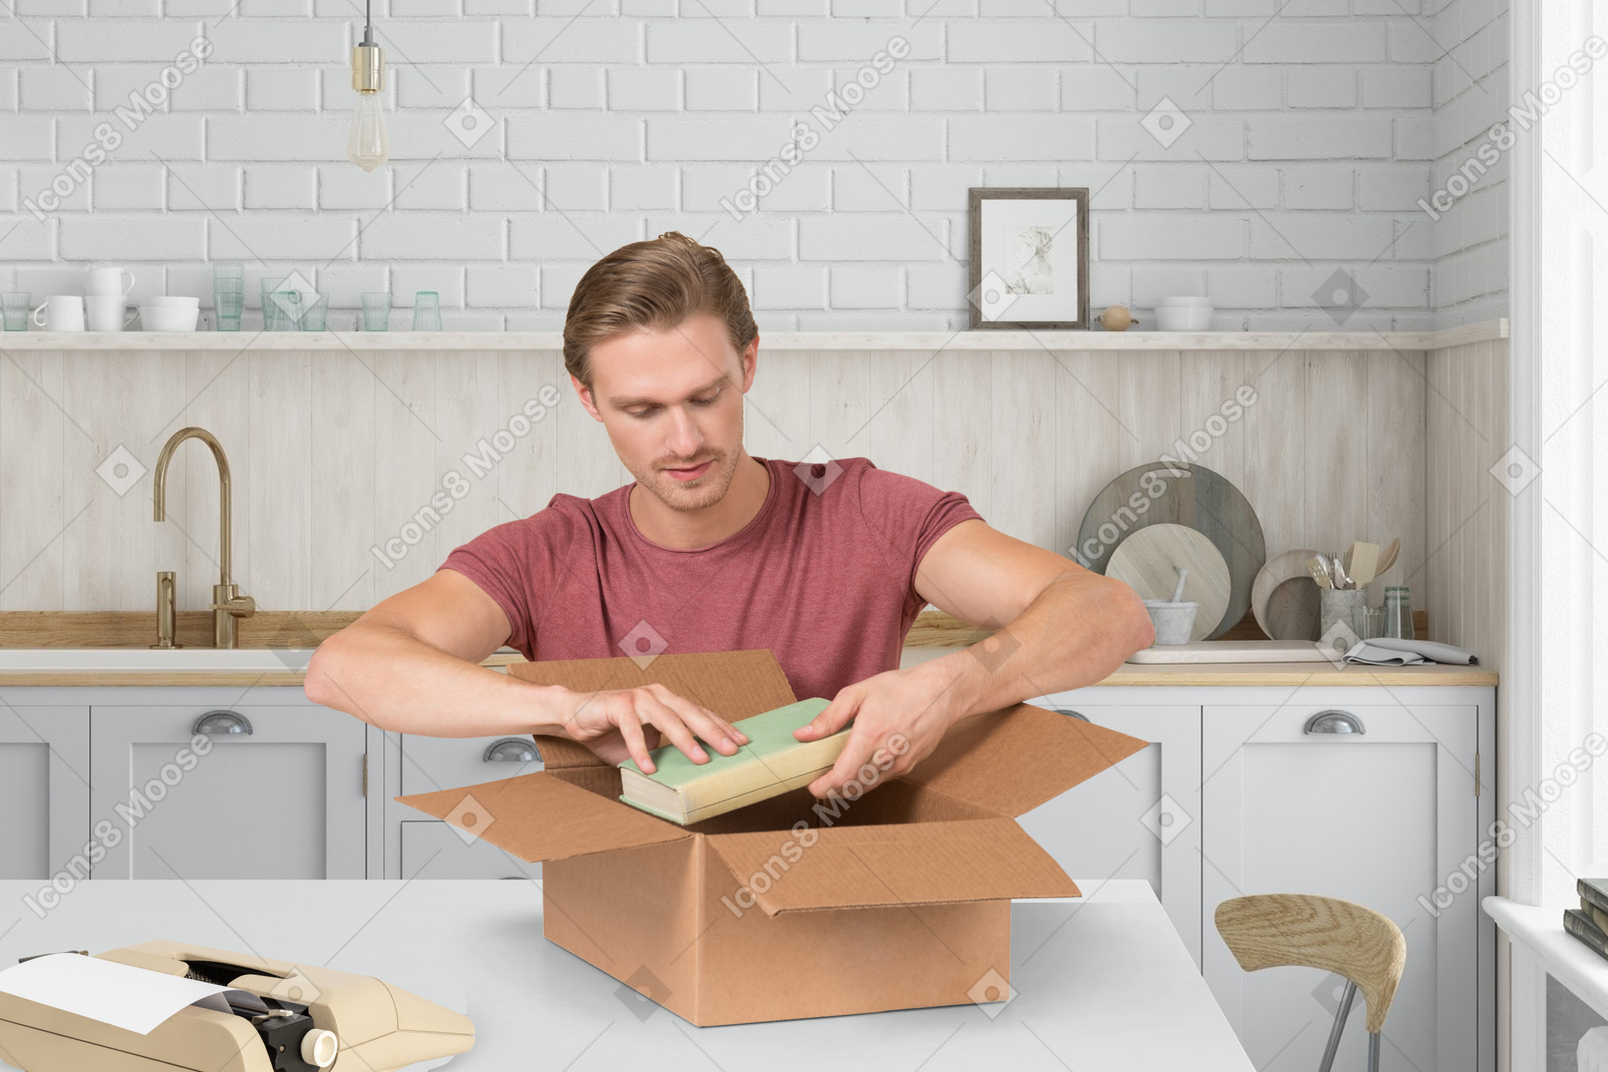 A man opening a box on a kitchen counter